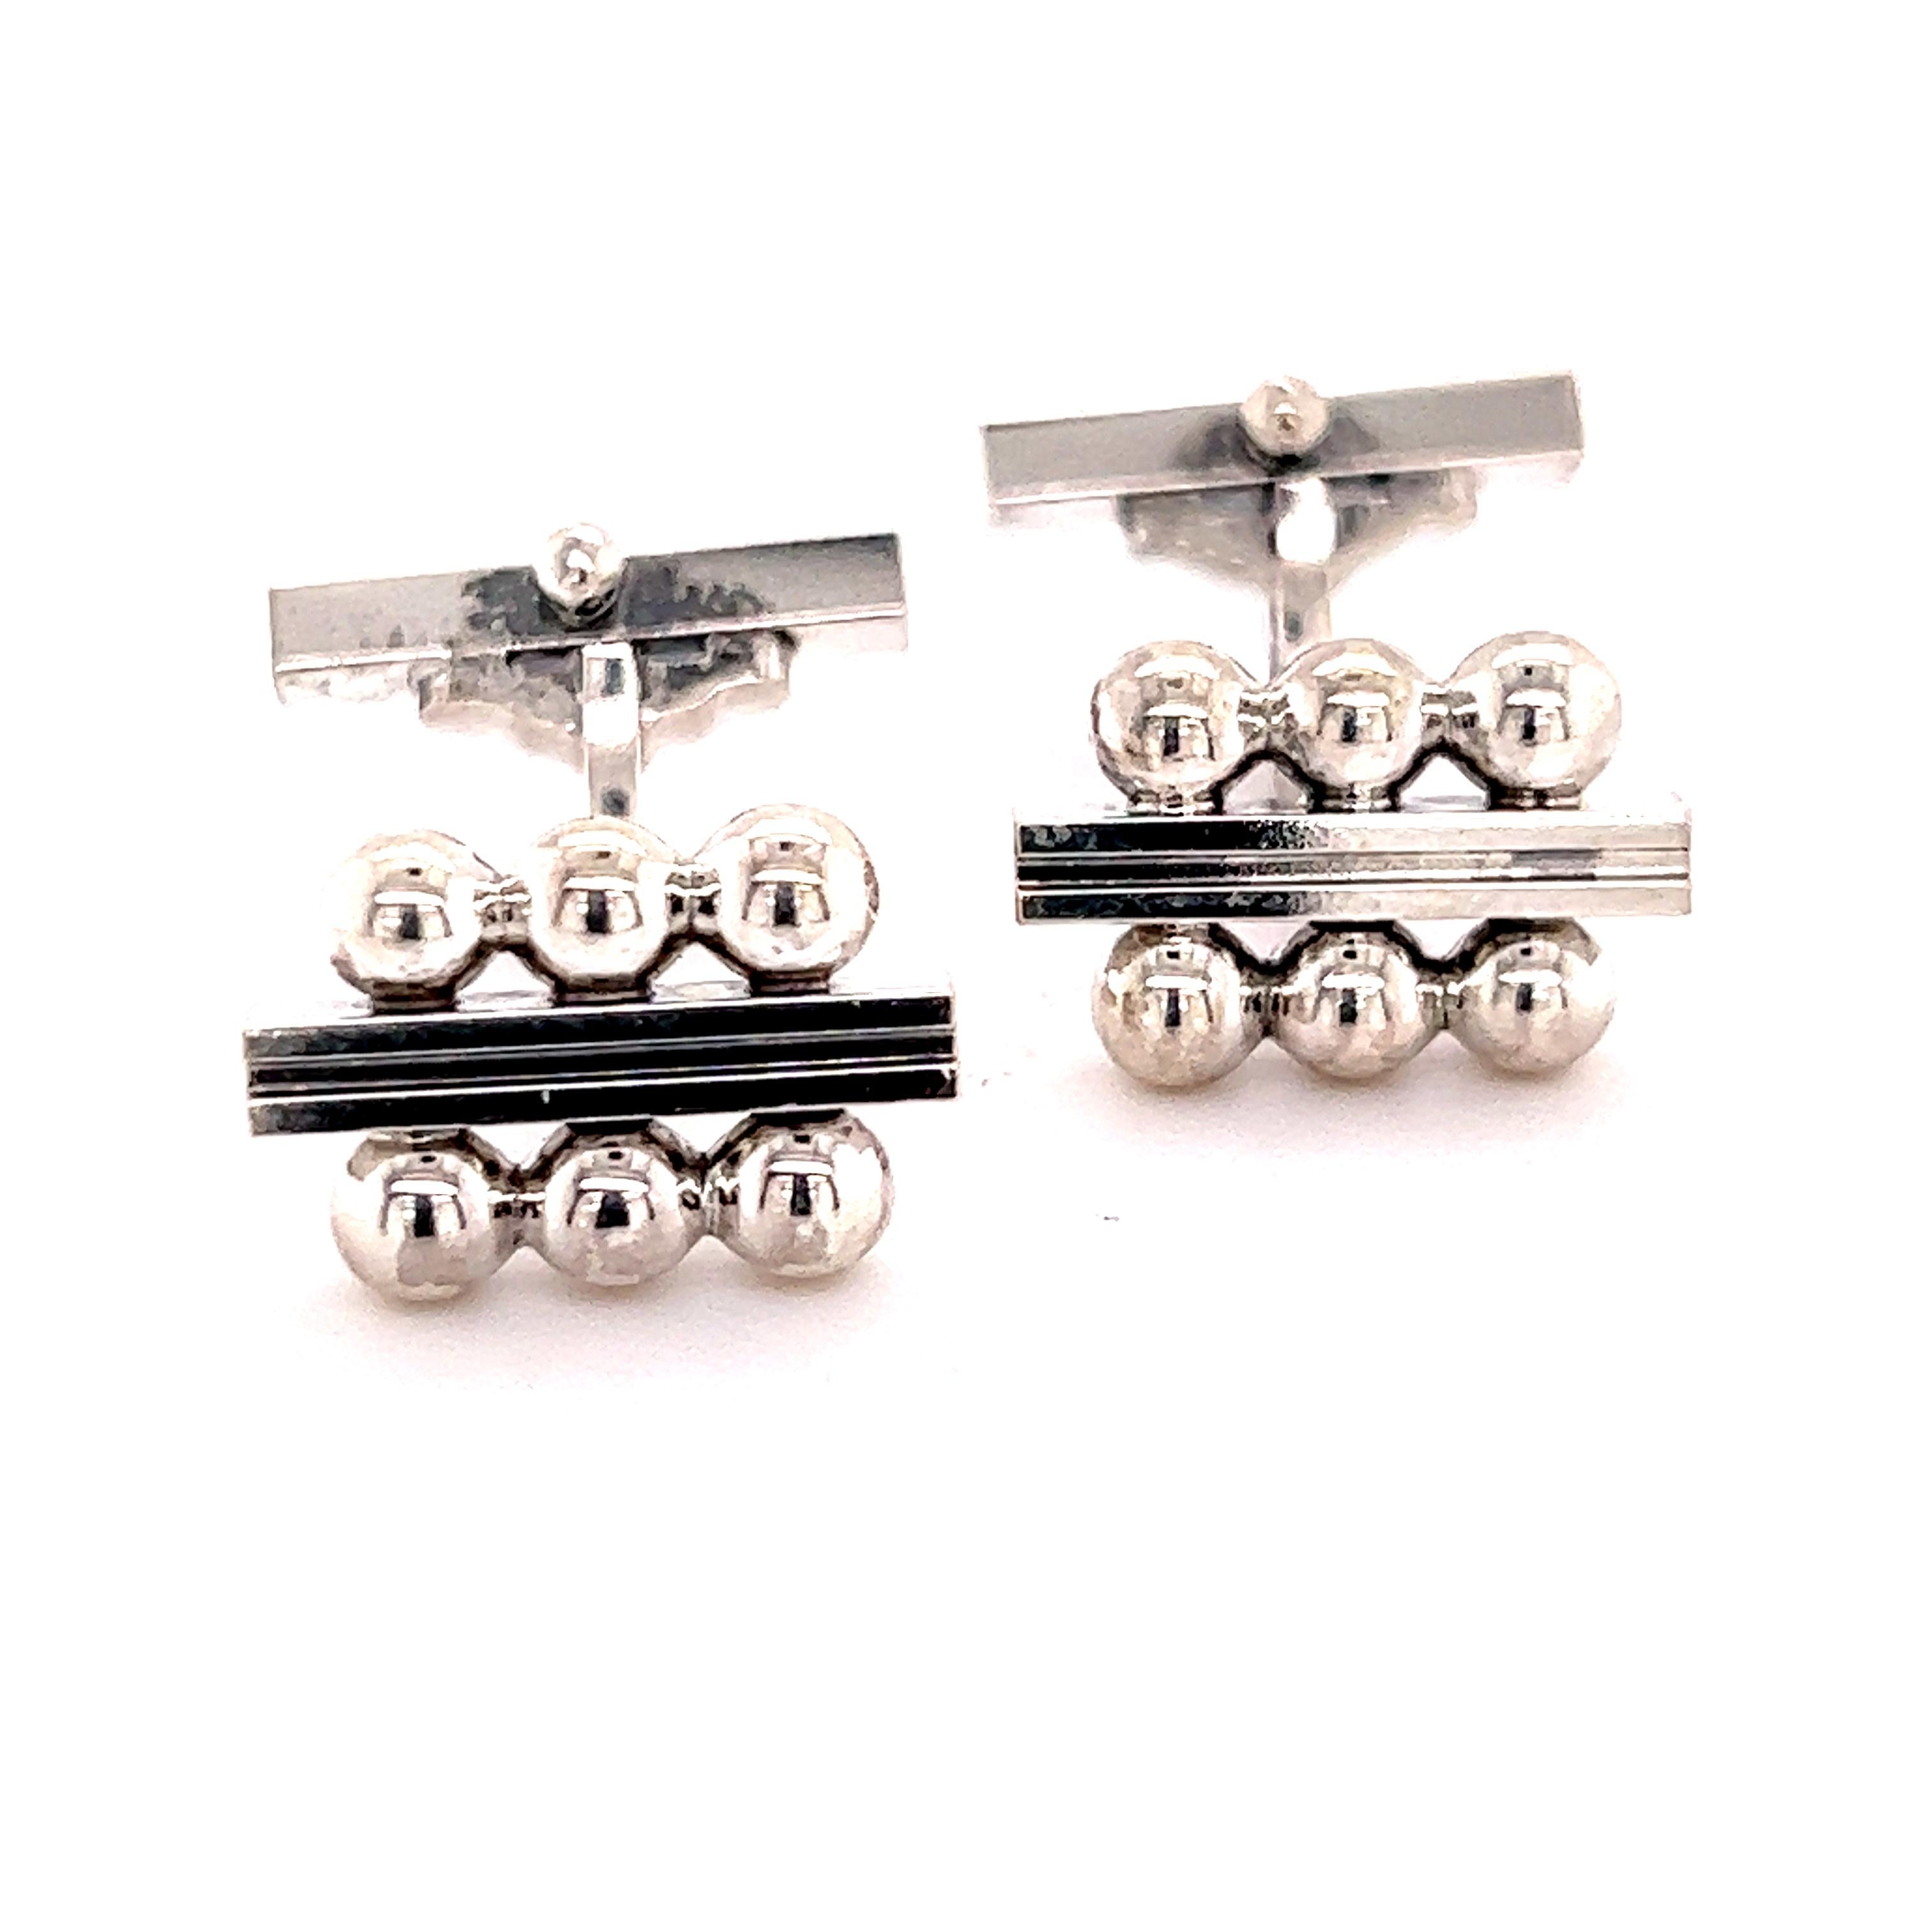 Georg Jensen Estate Sterling Silver Cufflinks 10.5 Grams GJ7

These elegant Authentic Georg Jensen Men's Cufflinks are made of sterling silver and have a weight of 10.5 grams.

TRUSTED SELLER SINCE 2002

PLEASE SEE OUR HUNDREDS OF POSITIVE FEEDBACKS